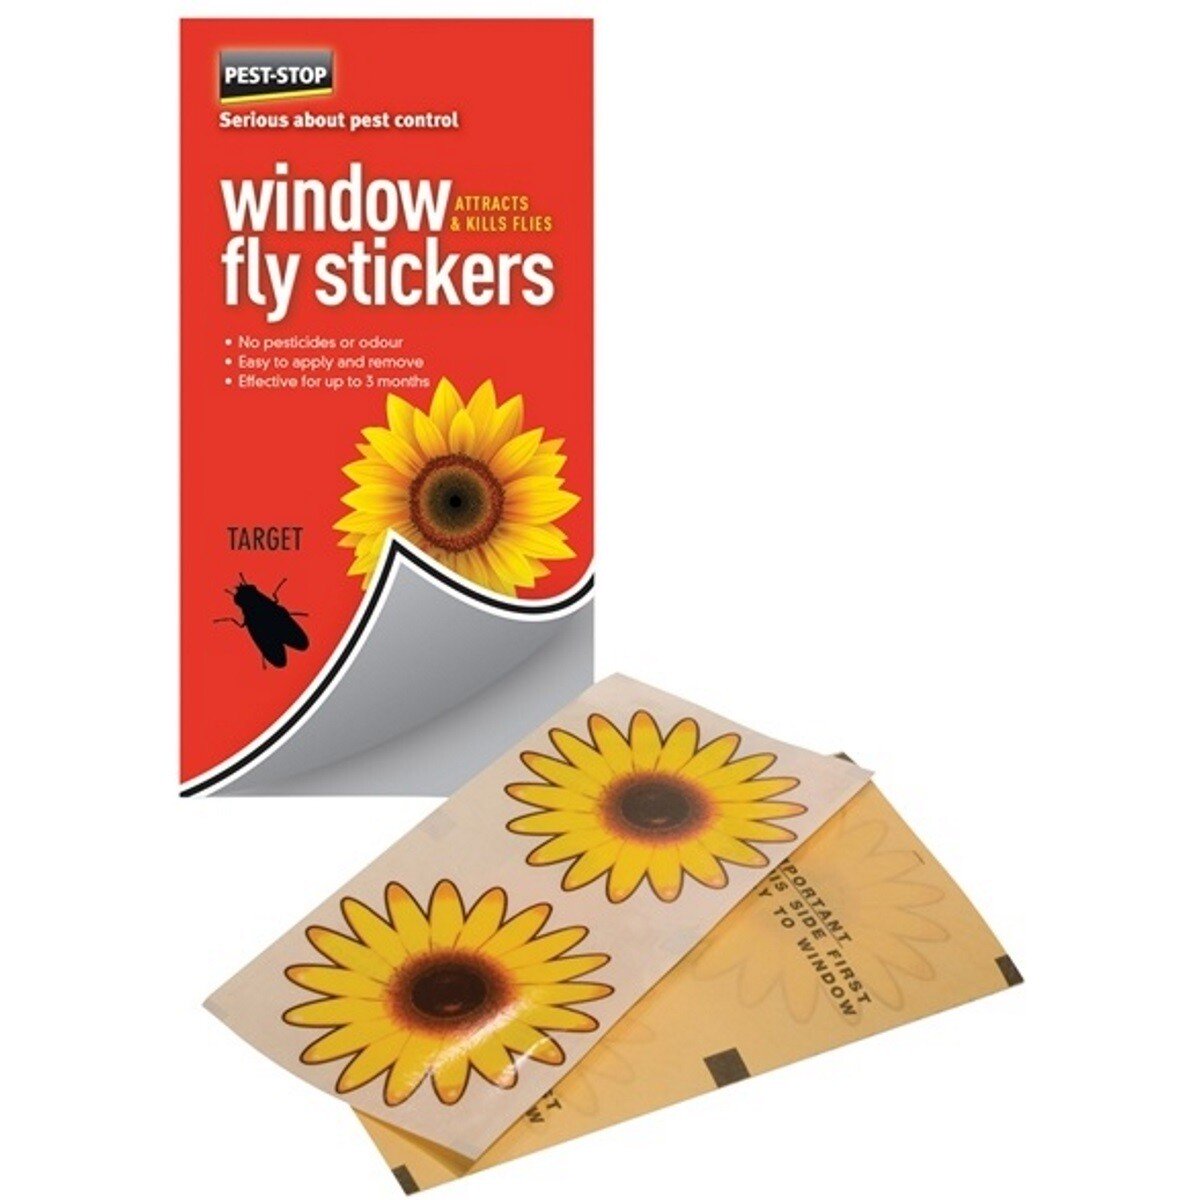 Pest-Stop PSWFS Window Fly Stickers (Pack of 4)  PRCPSWFS